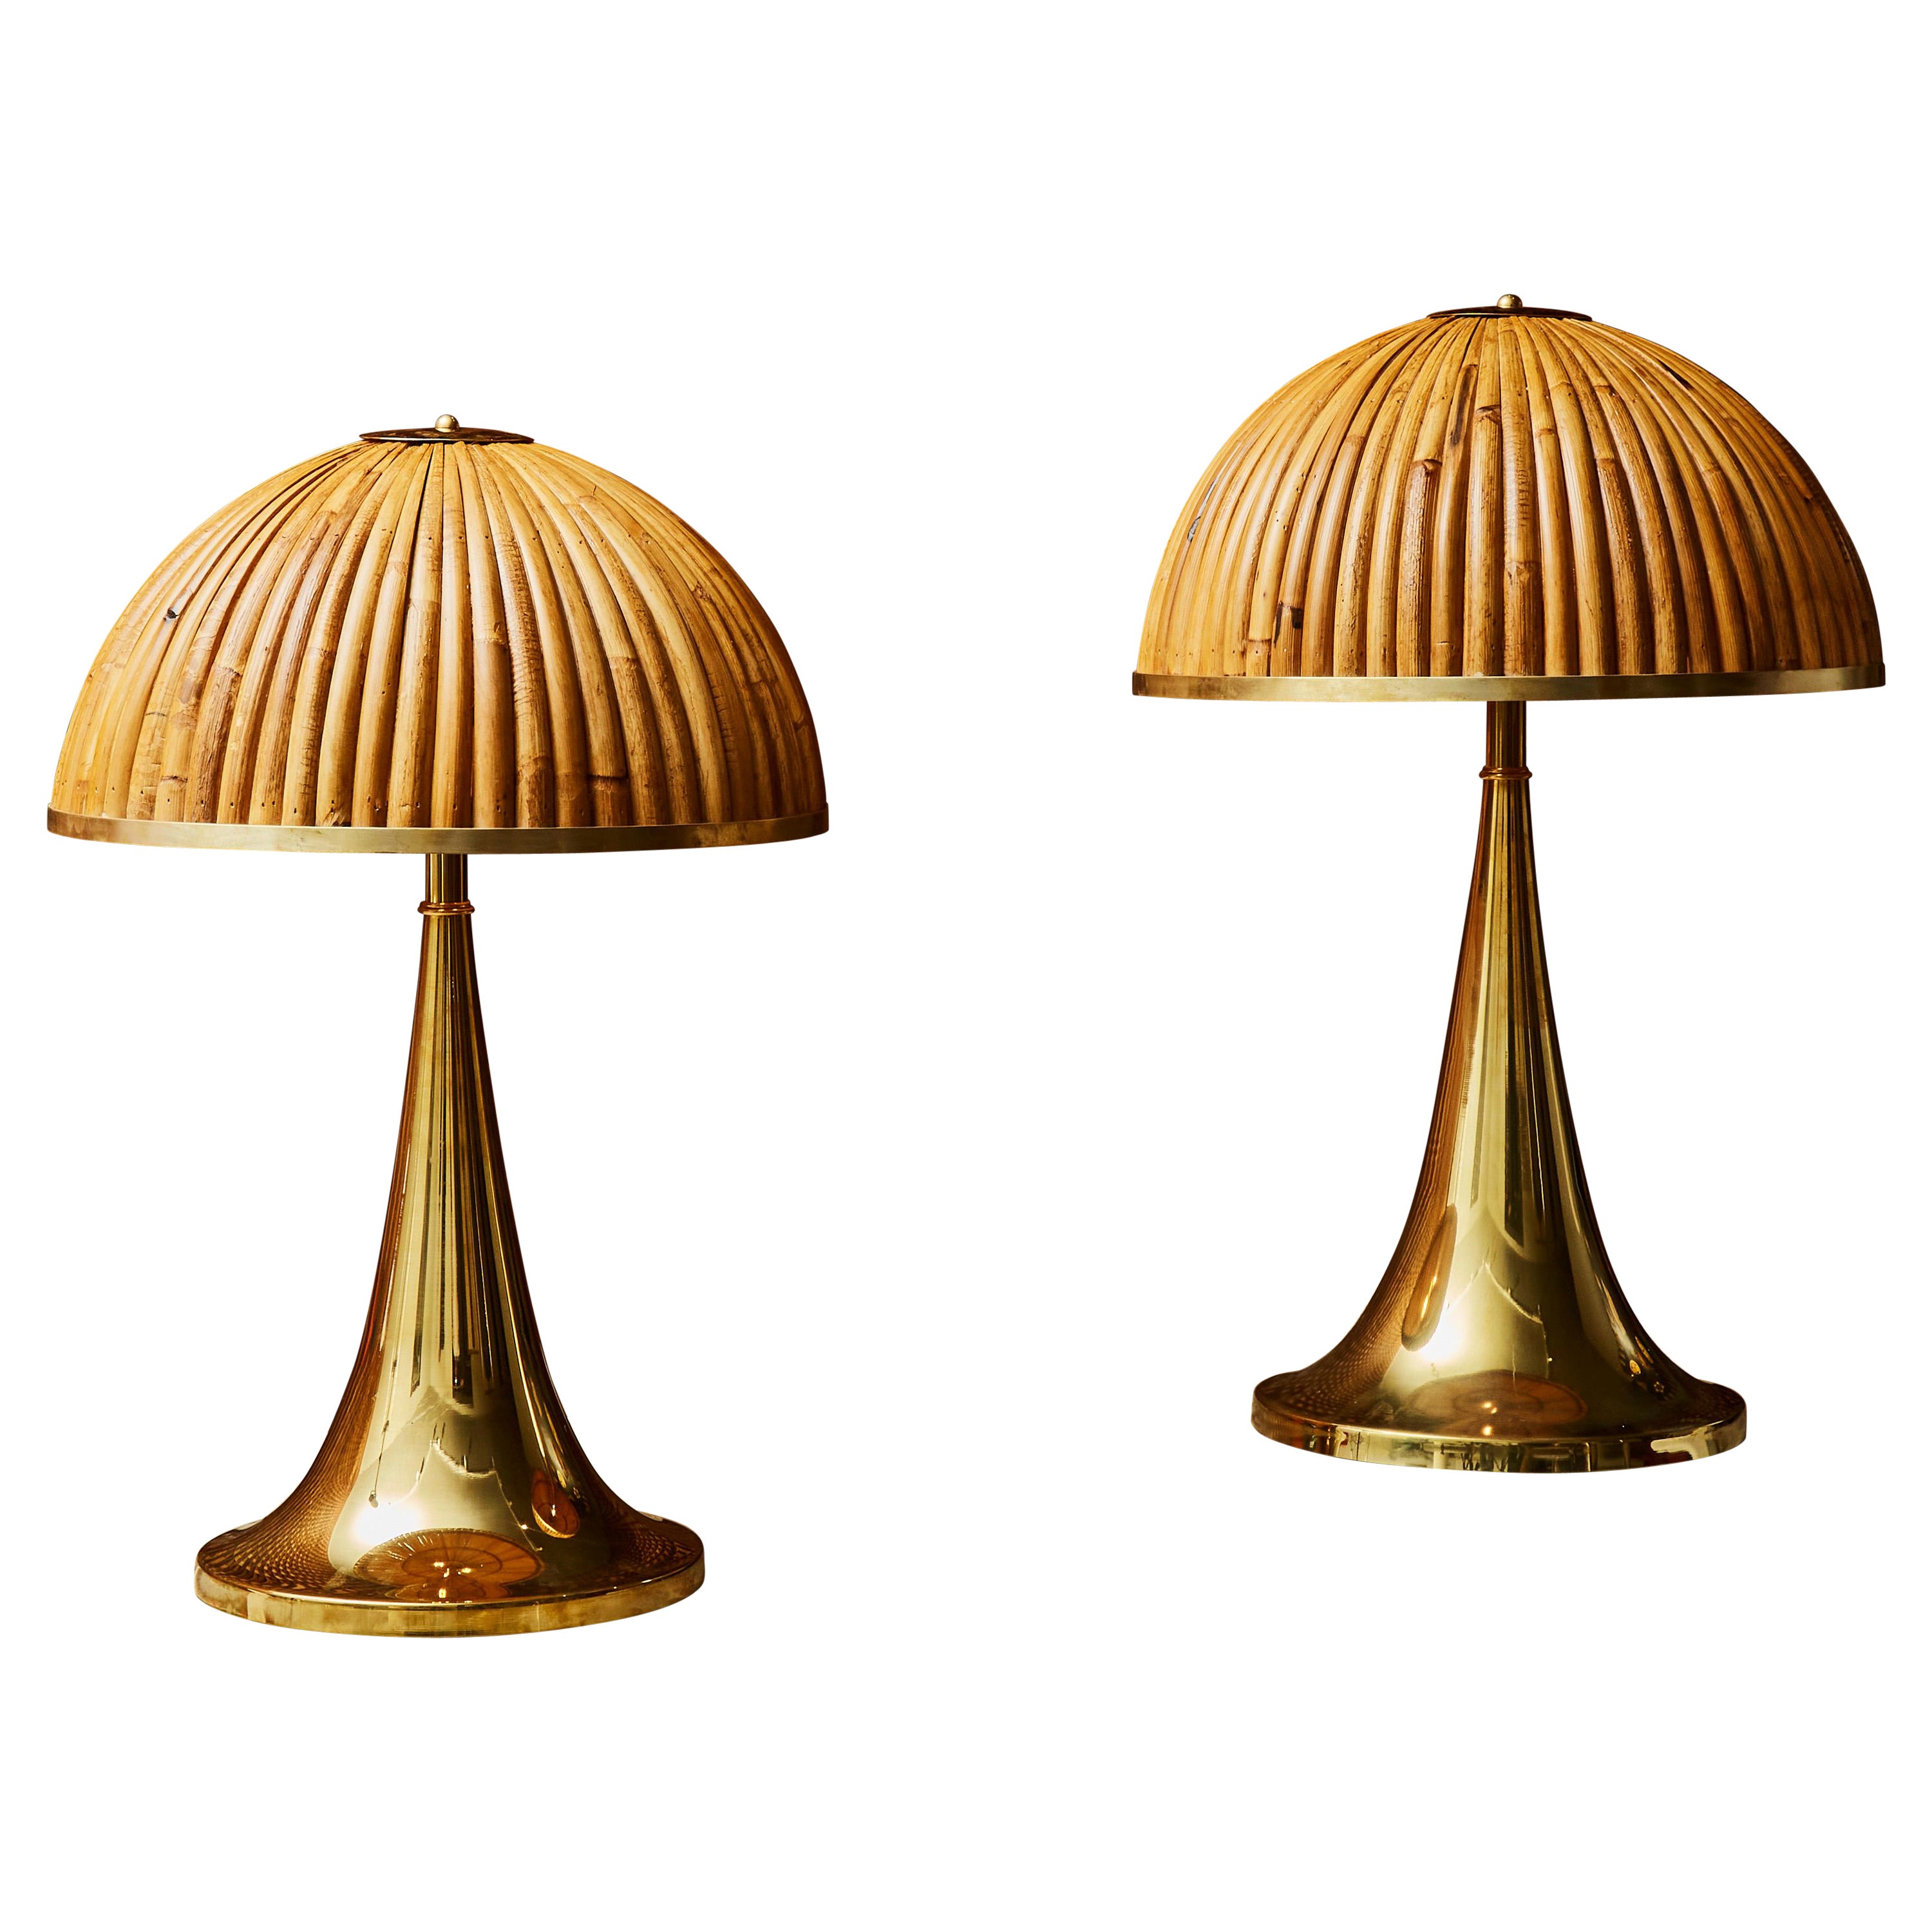 Pair of Brass Table Lamps with Wooden Shades